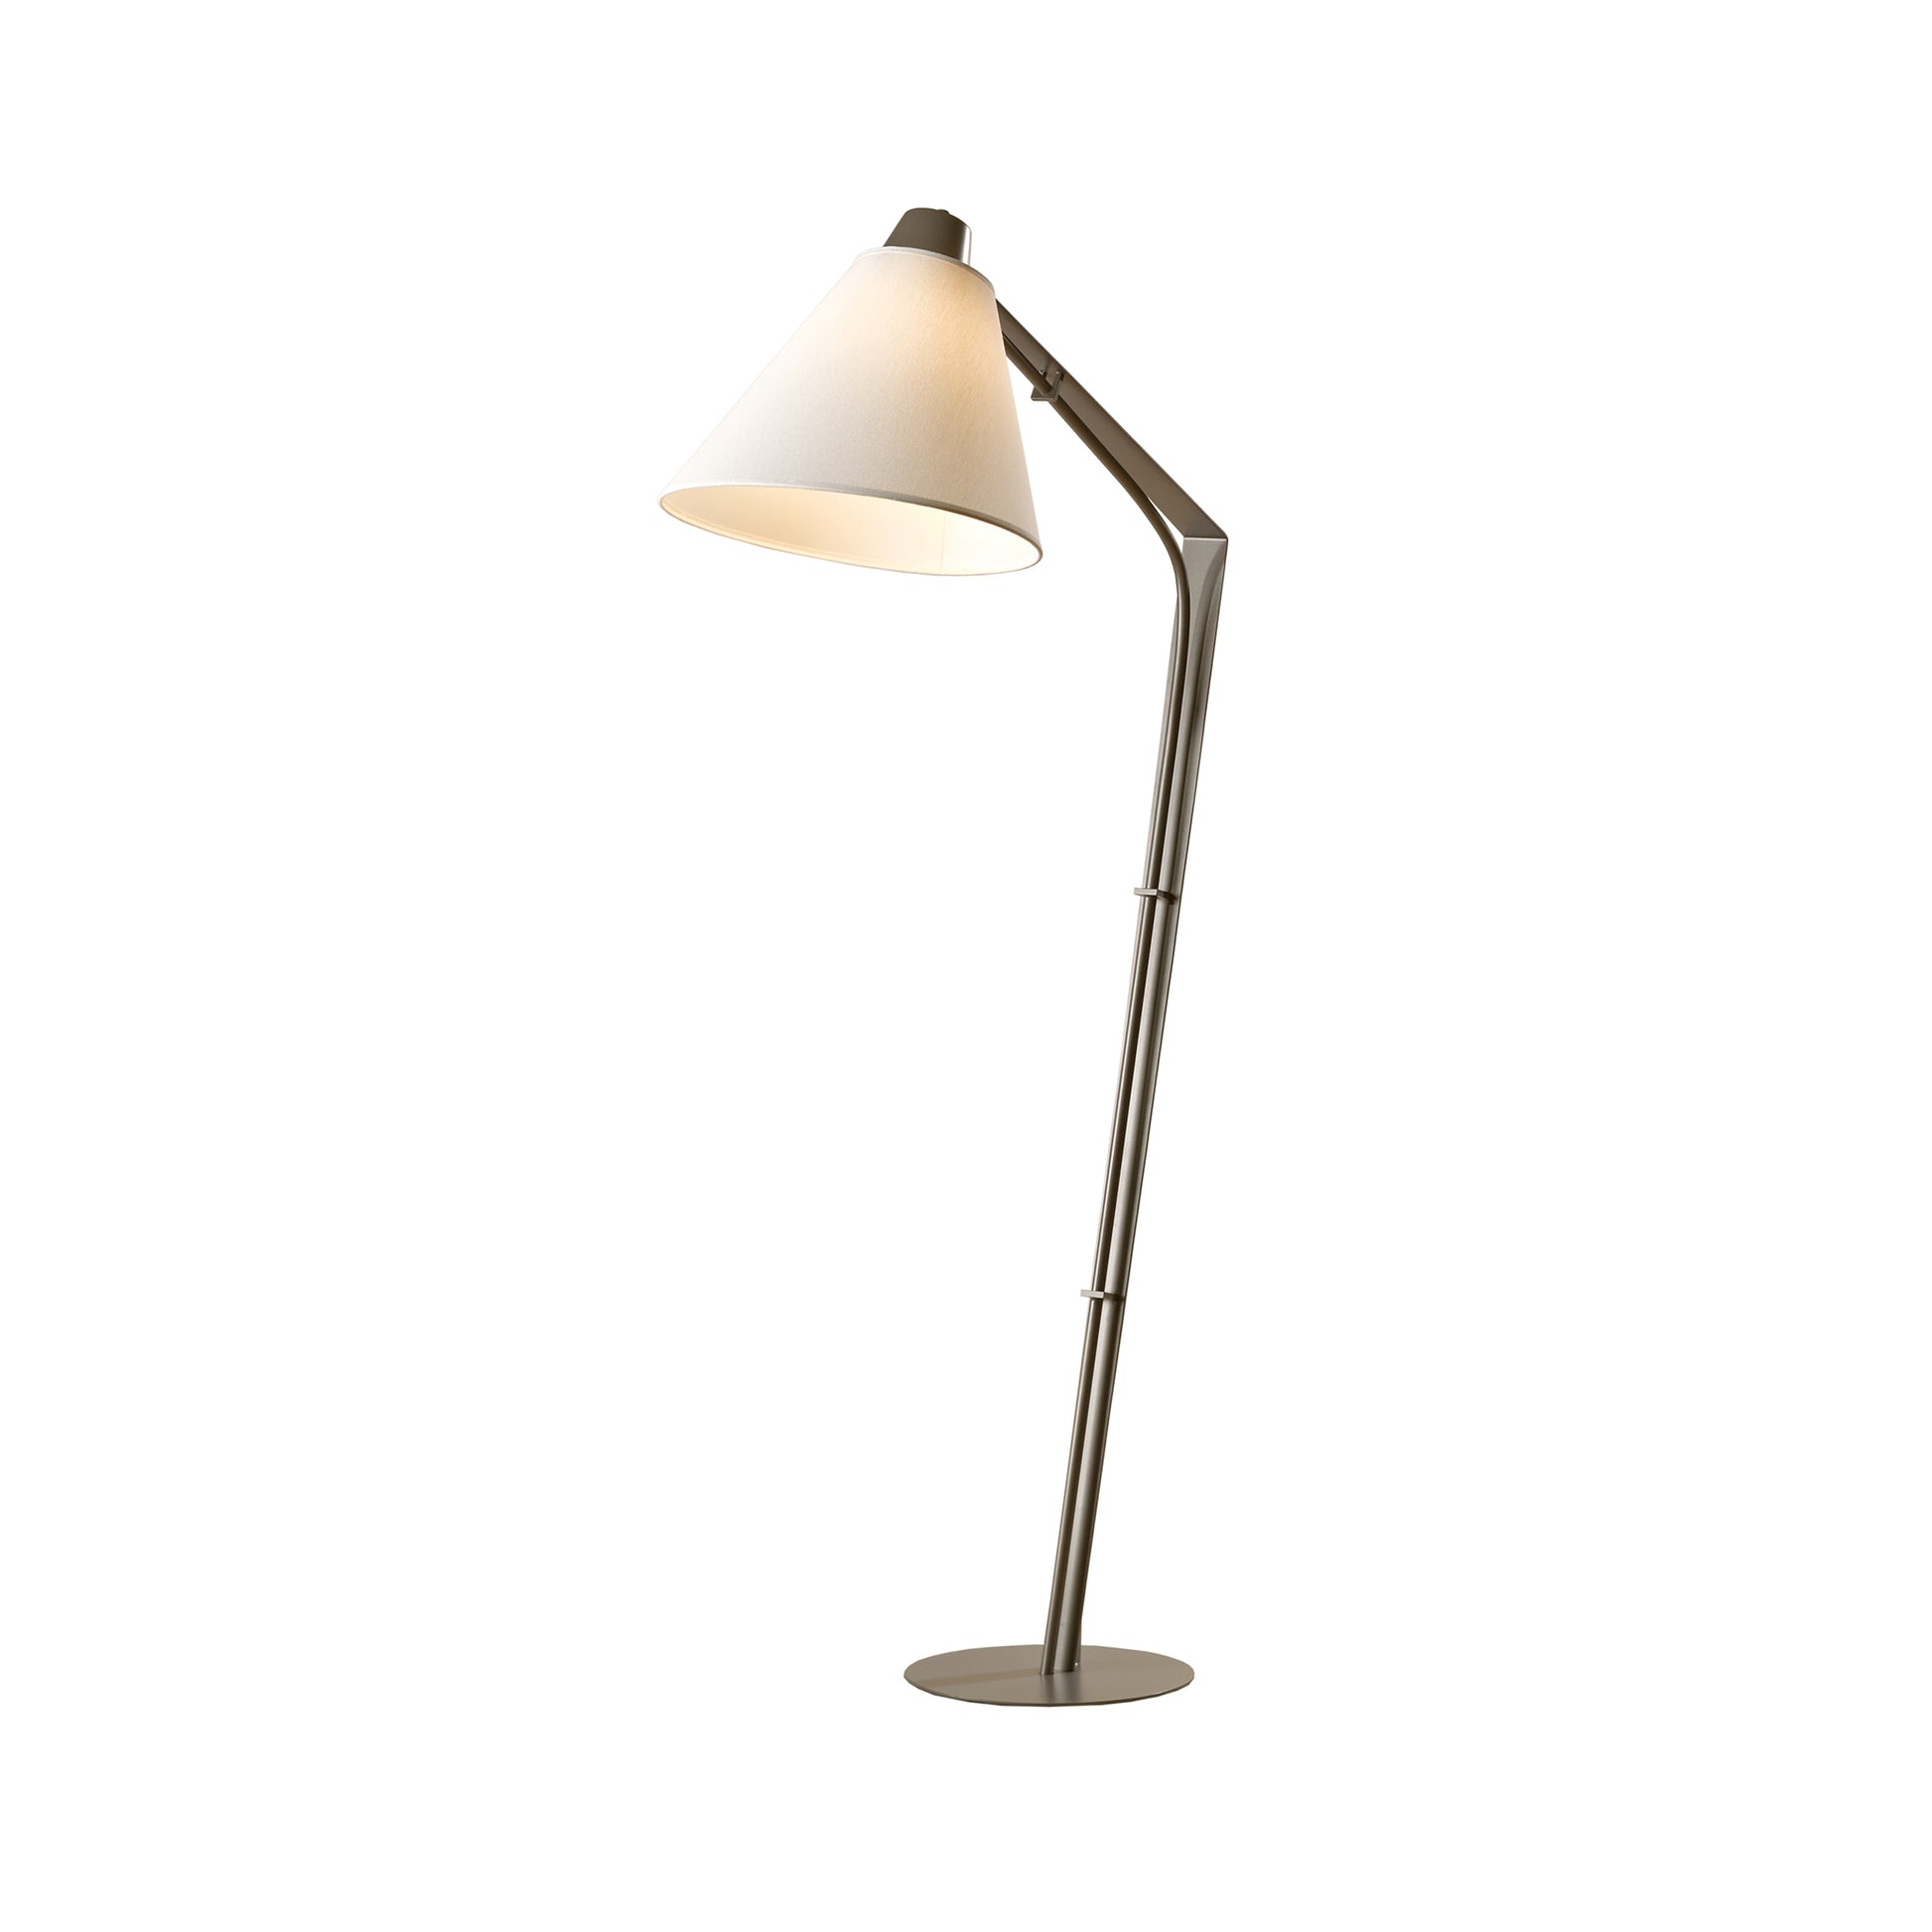 A Hubbardton Forge Reach floor lamp with a white shade on a white background.